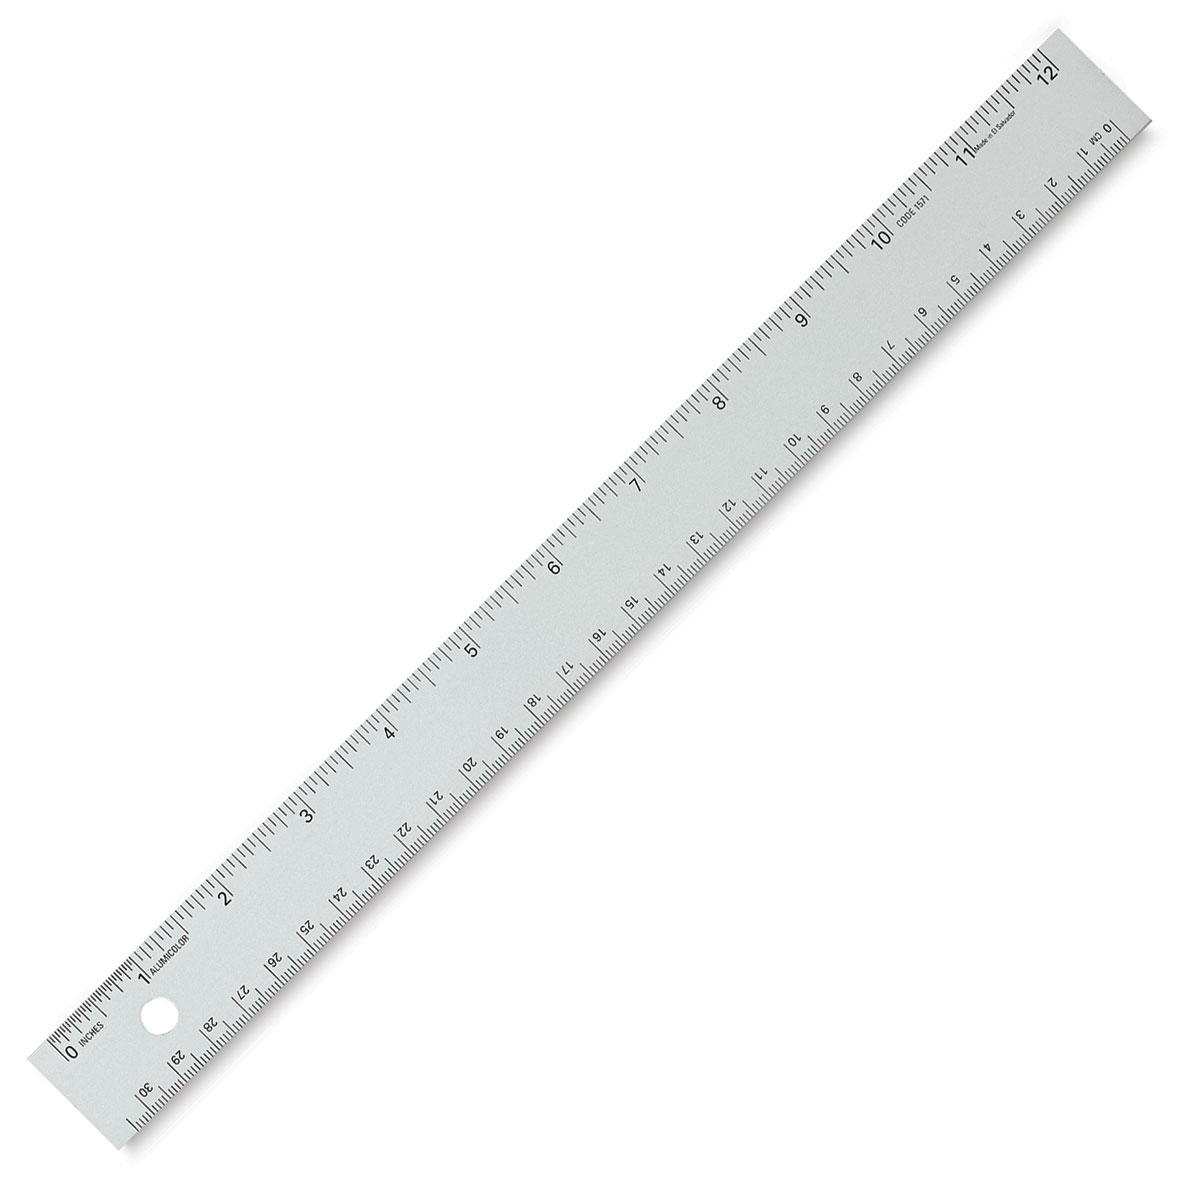 METAL RULER Stainless Steel Straight Edge Drawing Cutting Non Skid B_ff